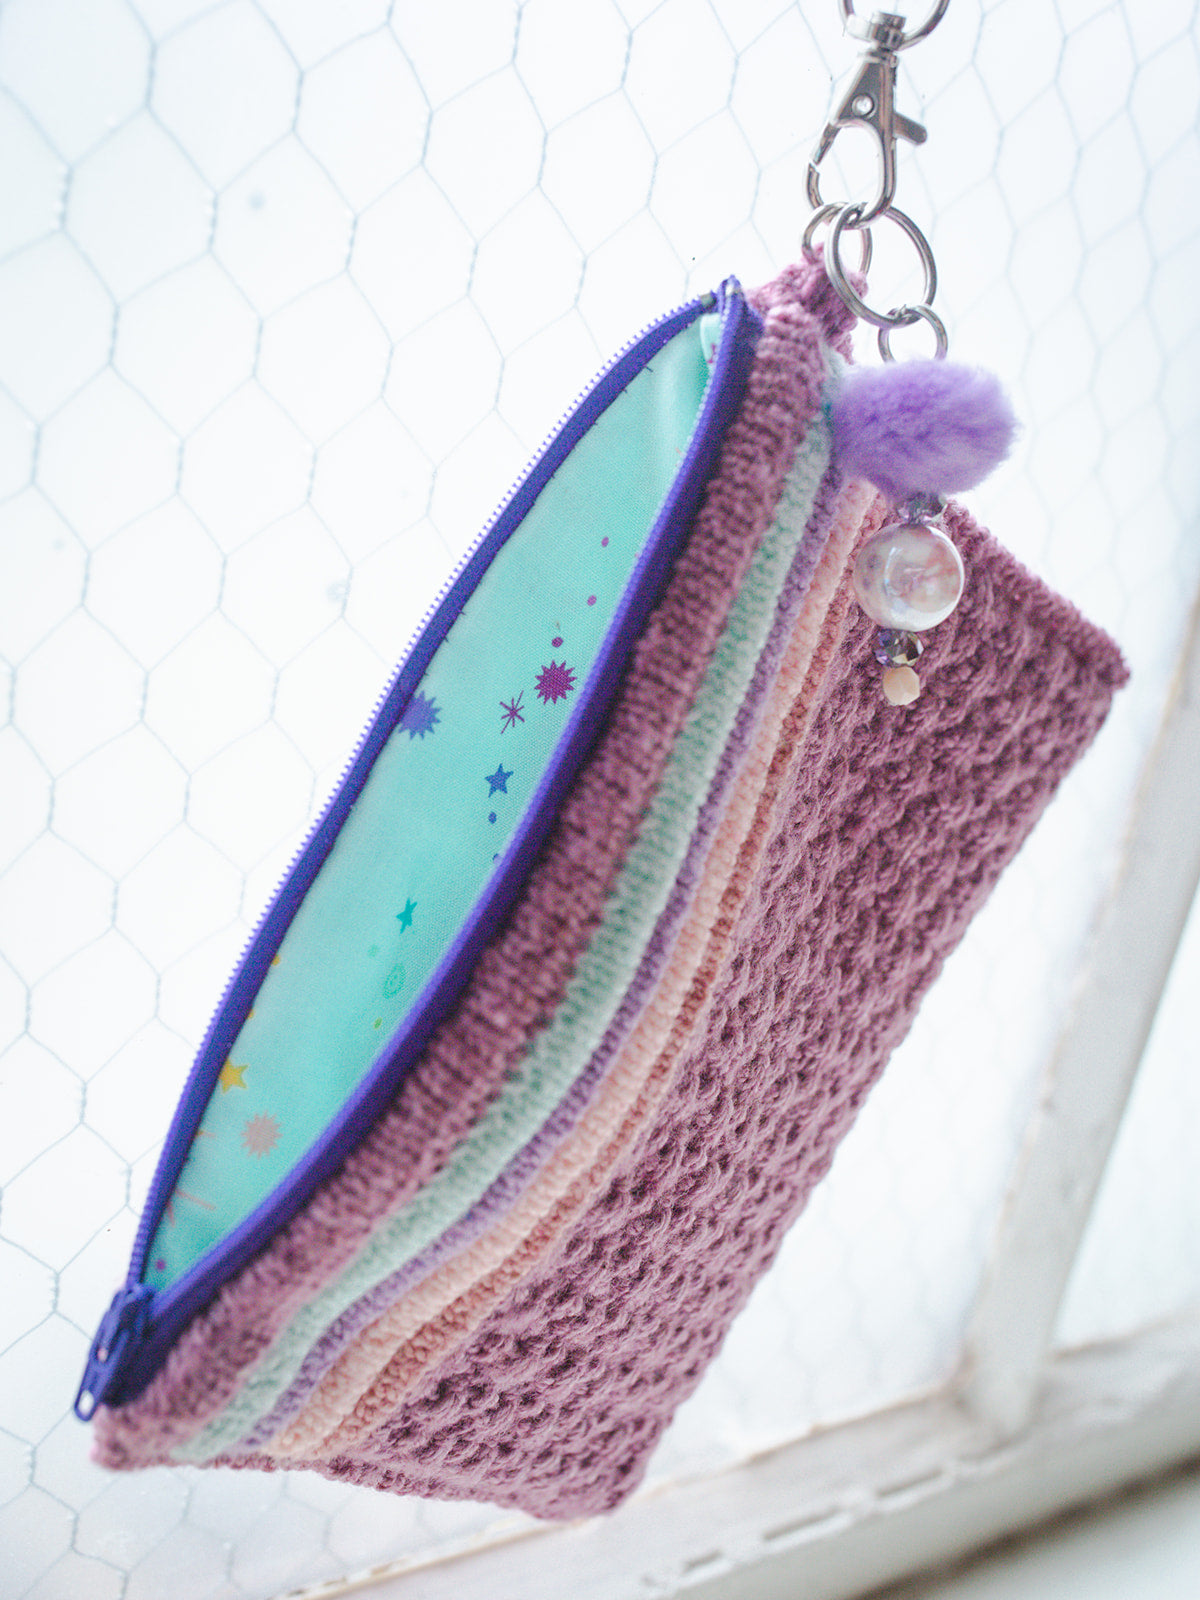 A pouch, lined with blue fabric, is knit out of pink fabrics. It has a lobster claw clasp and a keychain charm hanging off it.